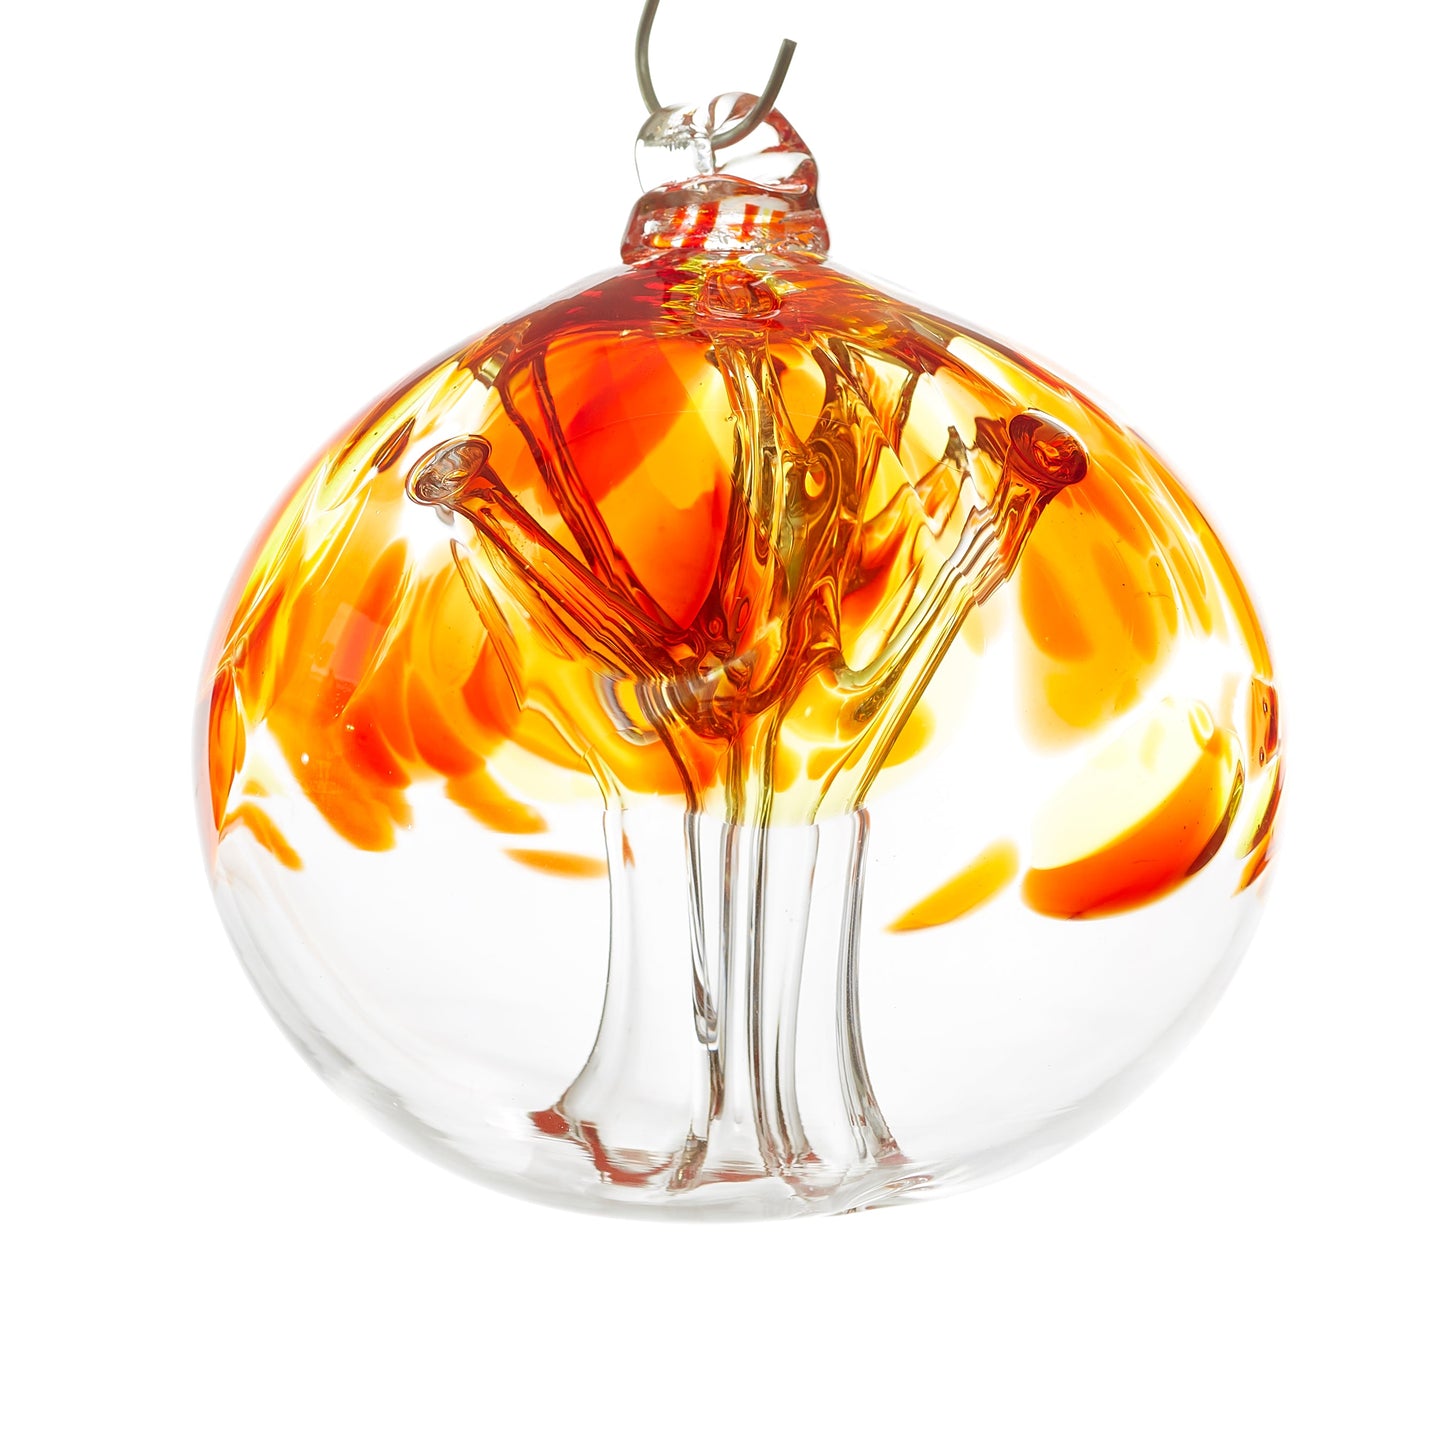 Hand blown glass tree of life ball. Red, yellow, and orange glass. Colour combination is called "Sunburst."